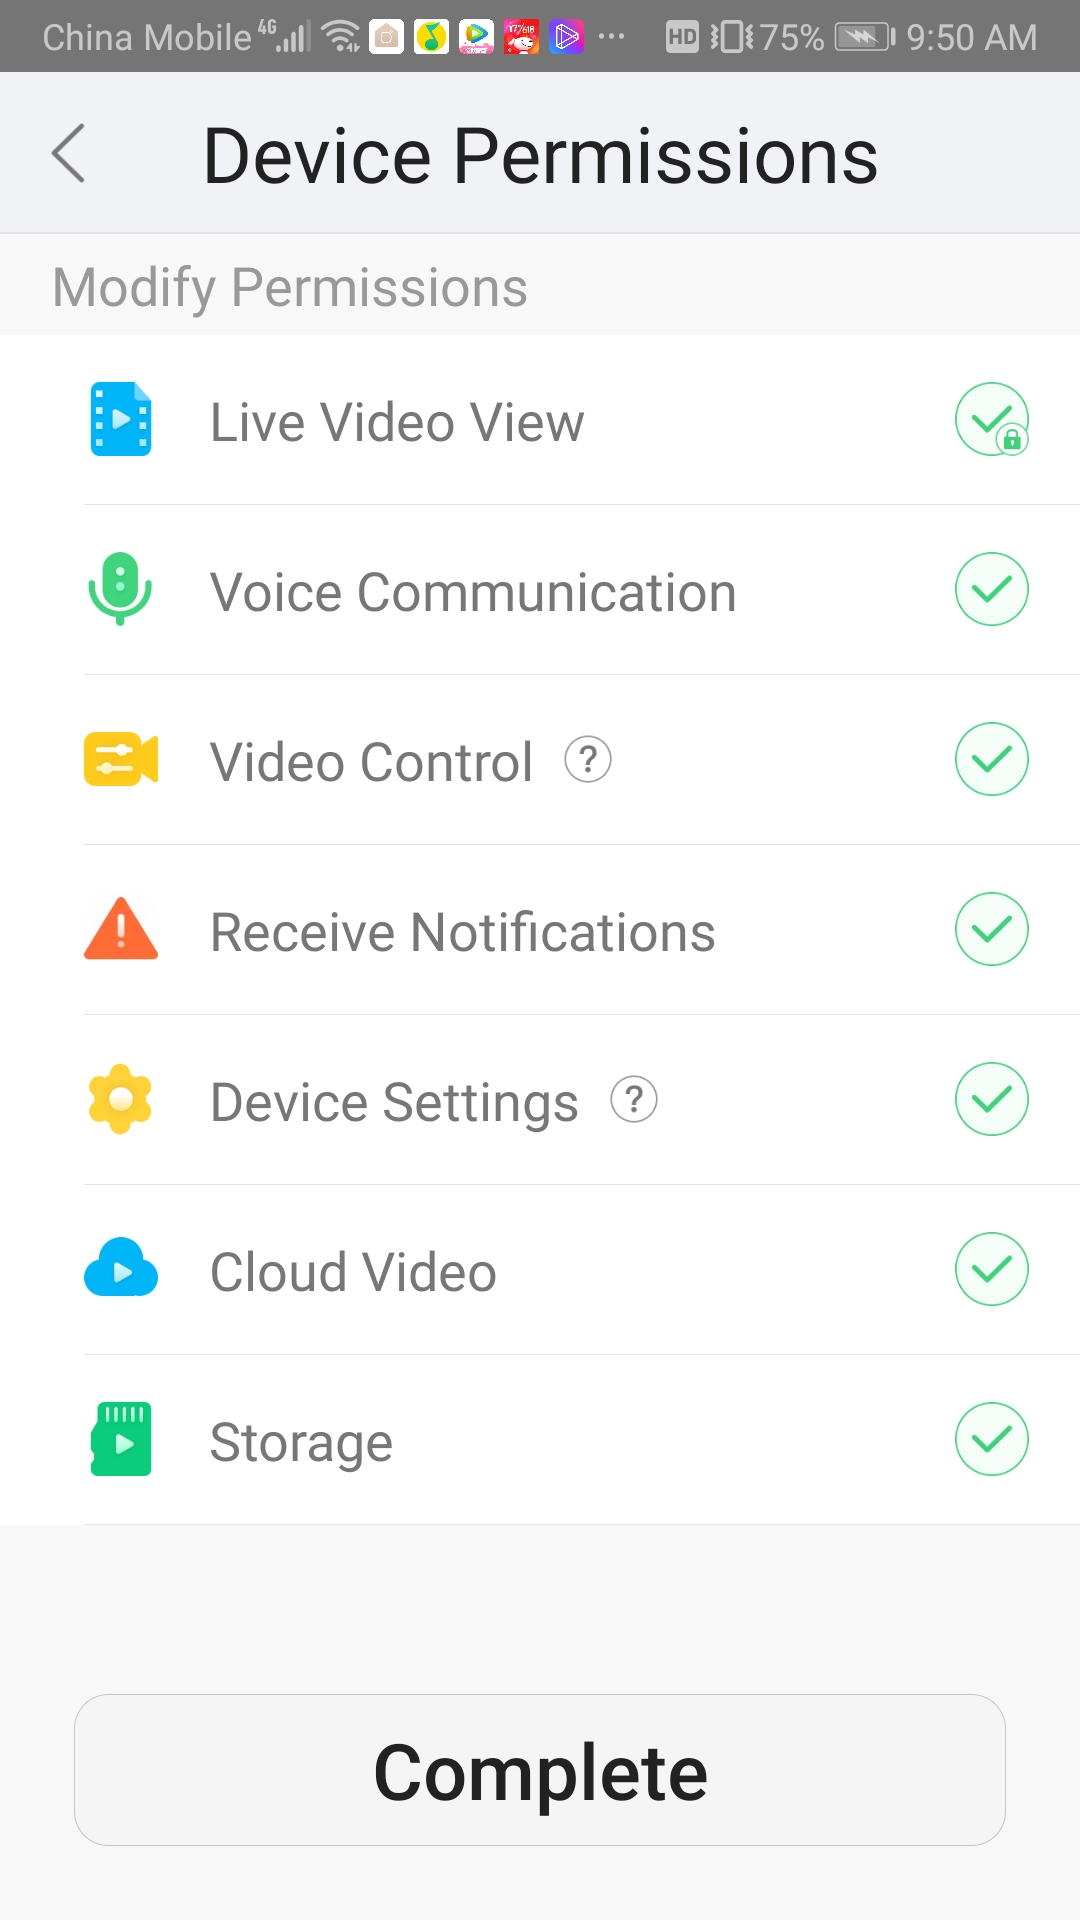 How do I share my device to new phone (another user)?